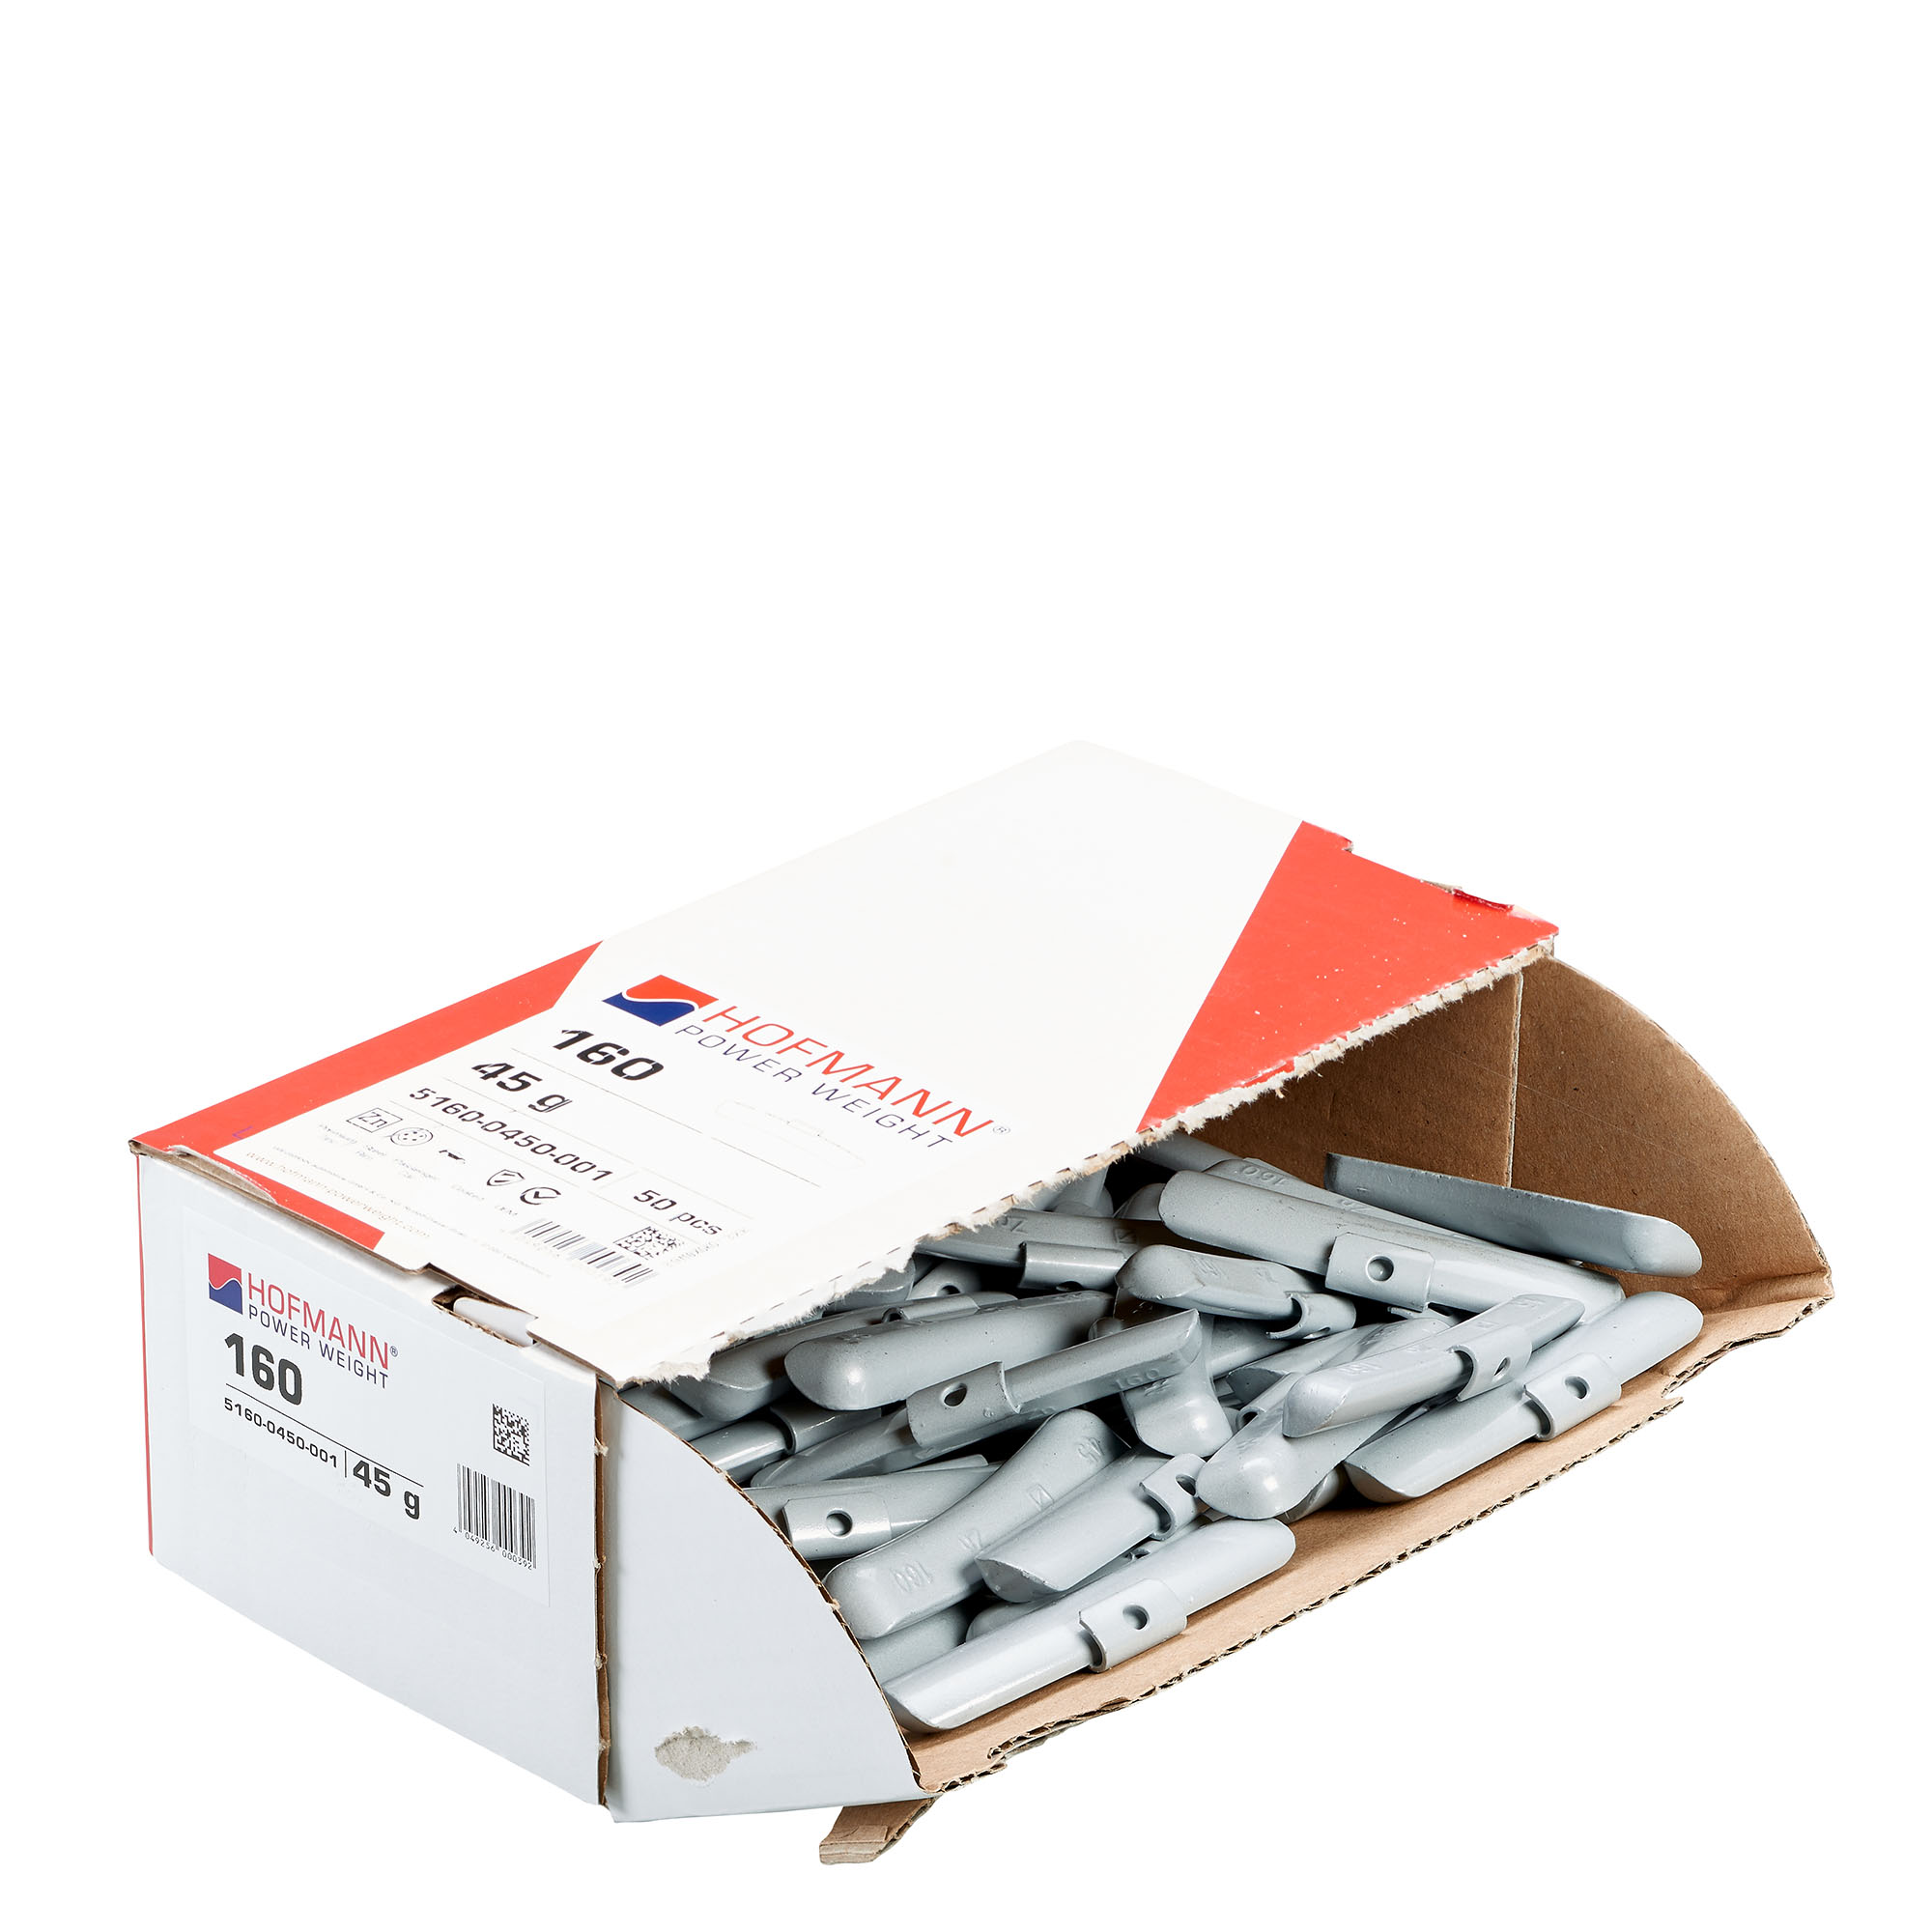 knock-on weight - Typ 160, 45 g, zinc, silver